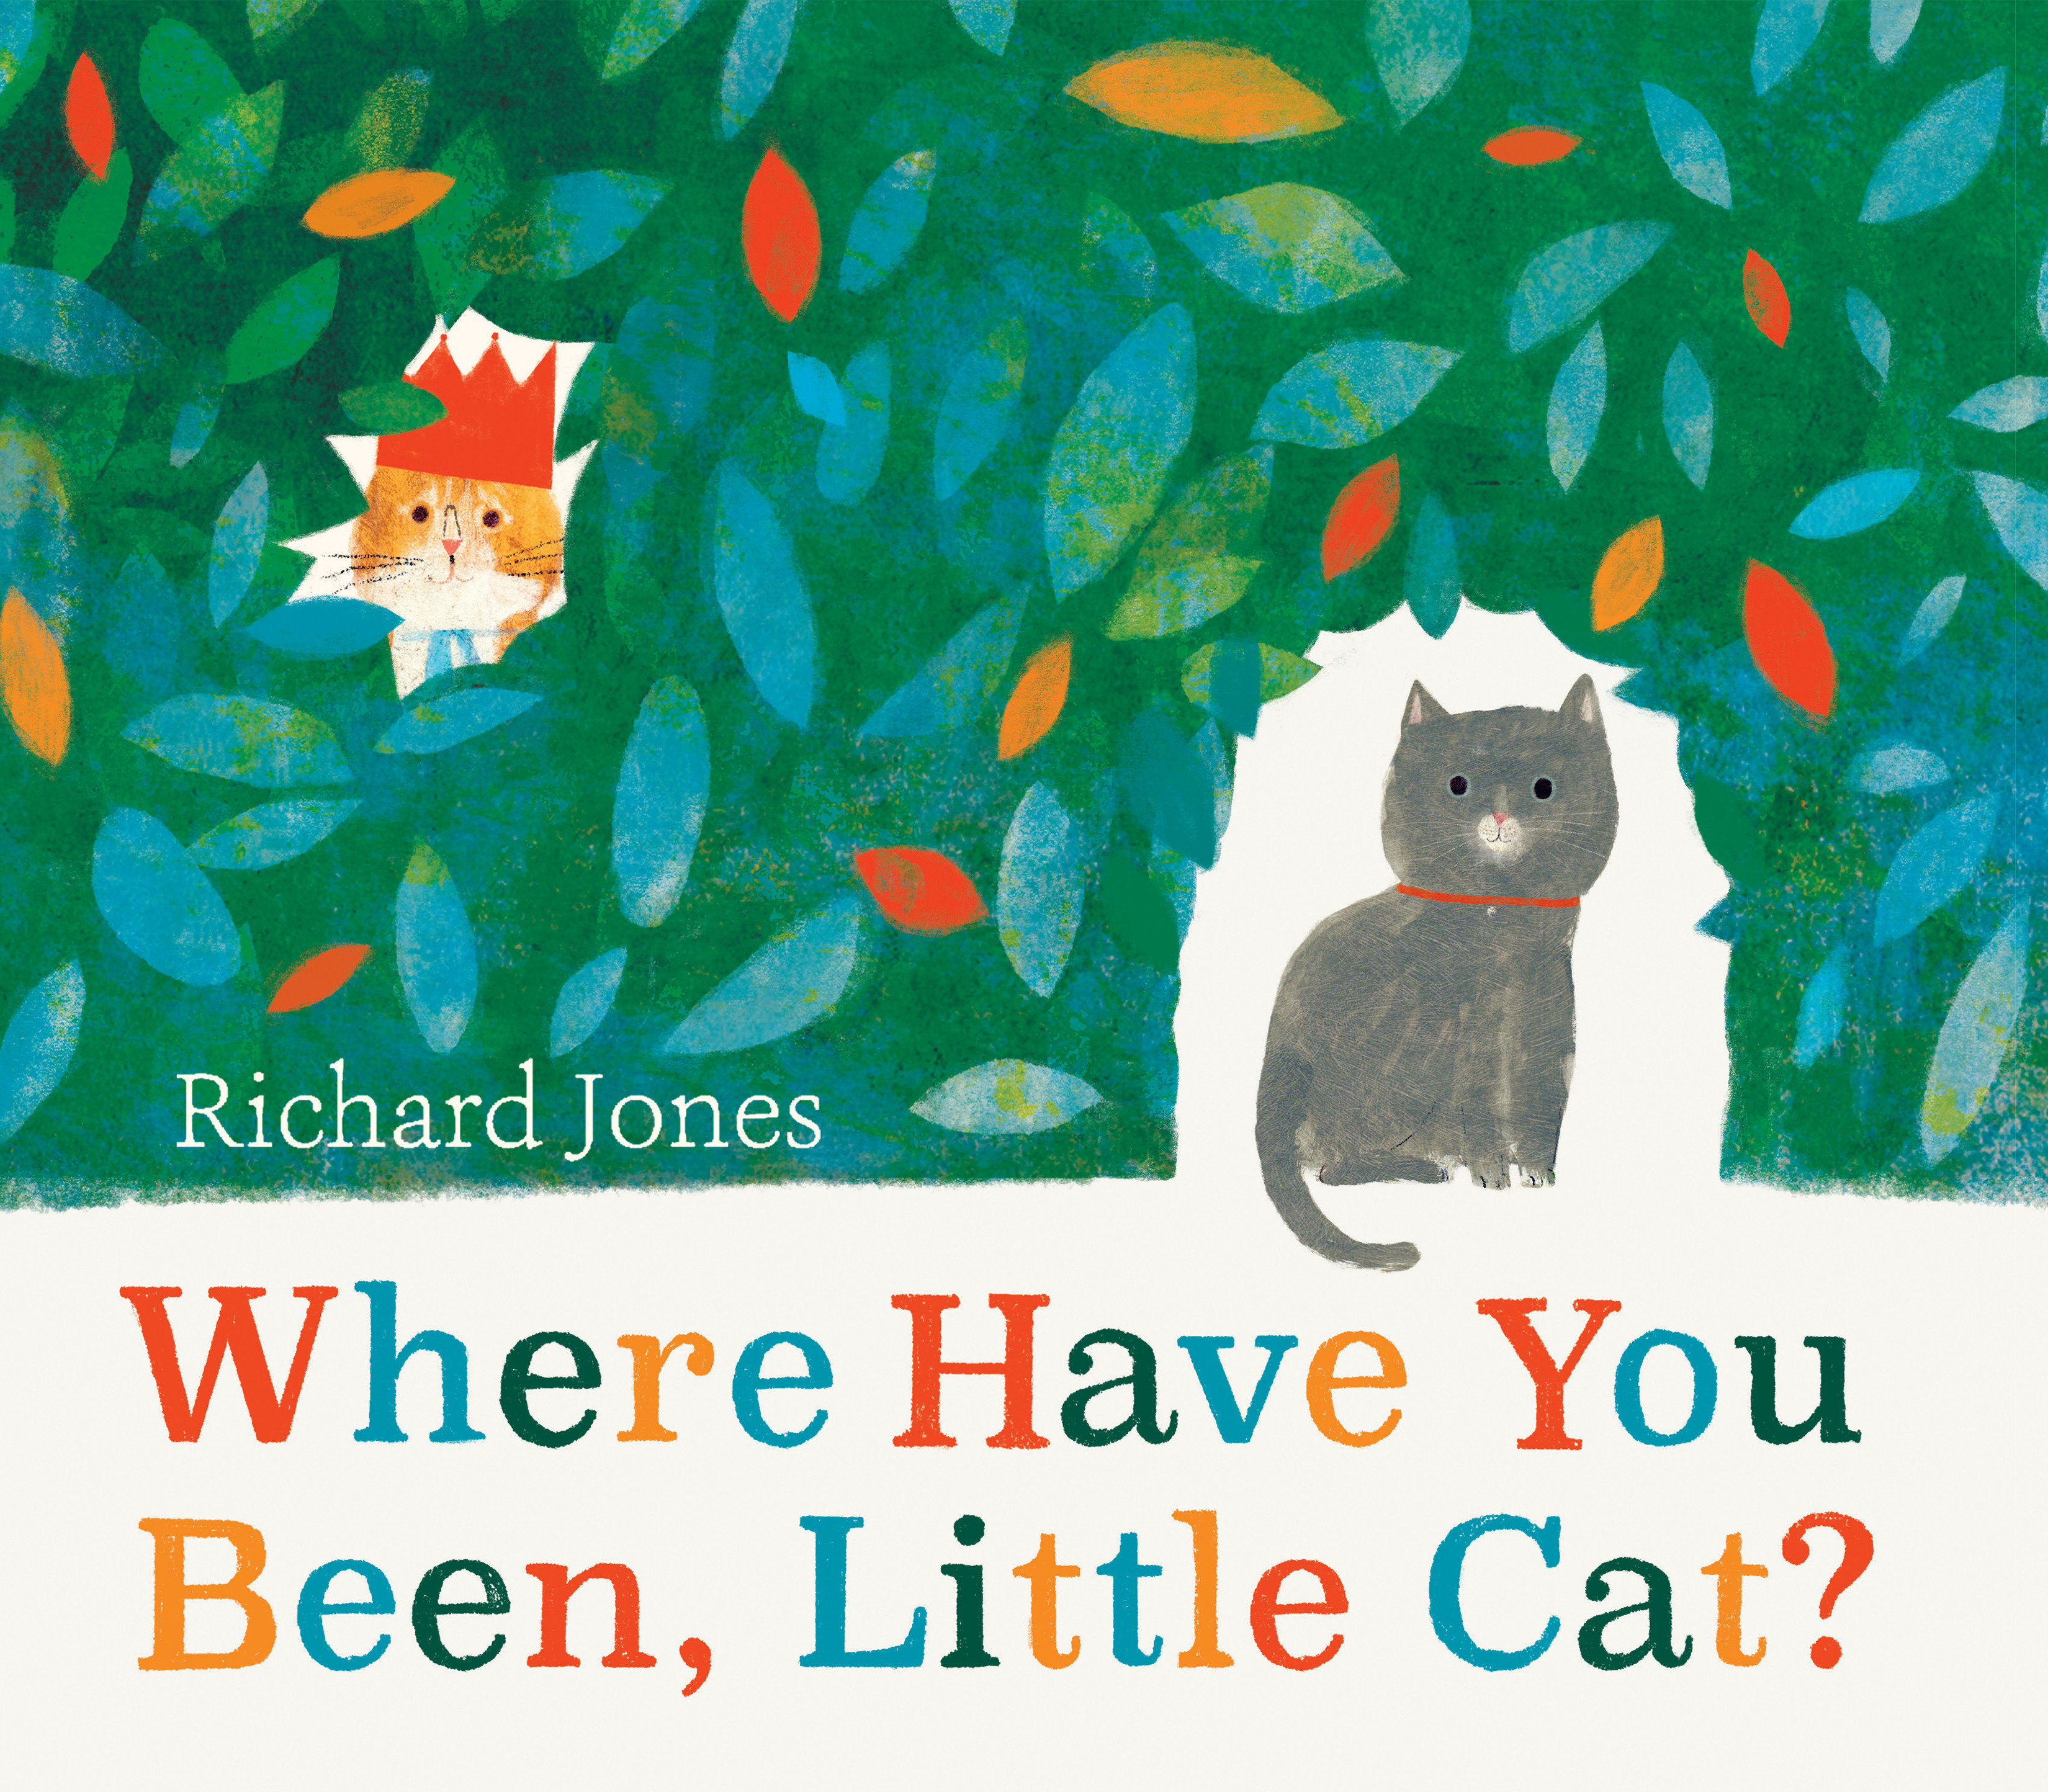 Where Have You Been, Little Cat? (Hardcover Book)